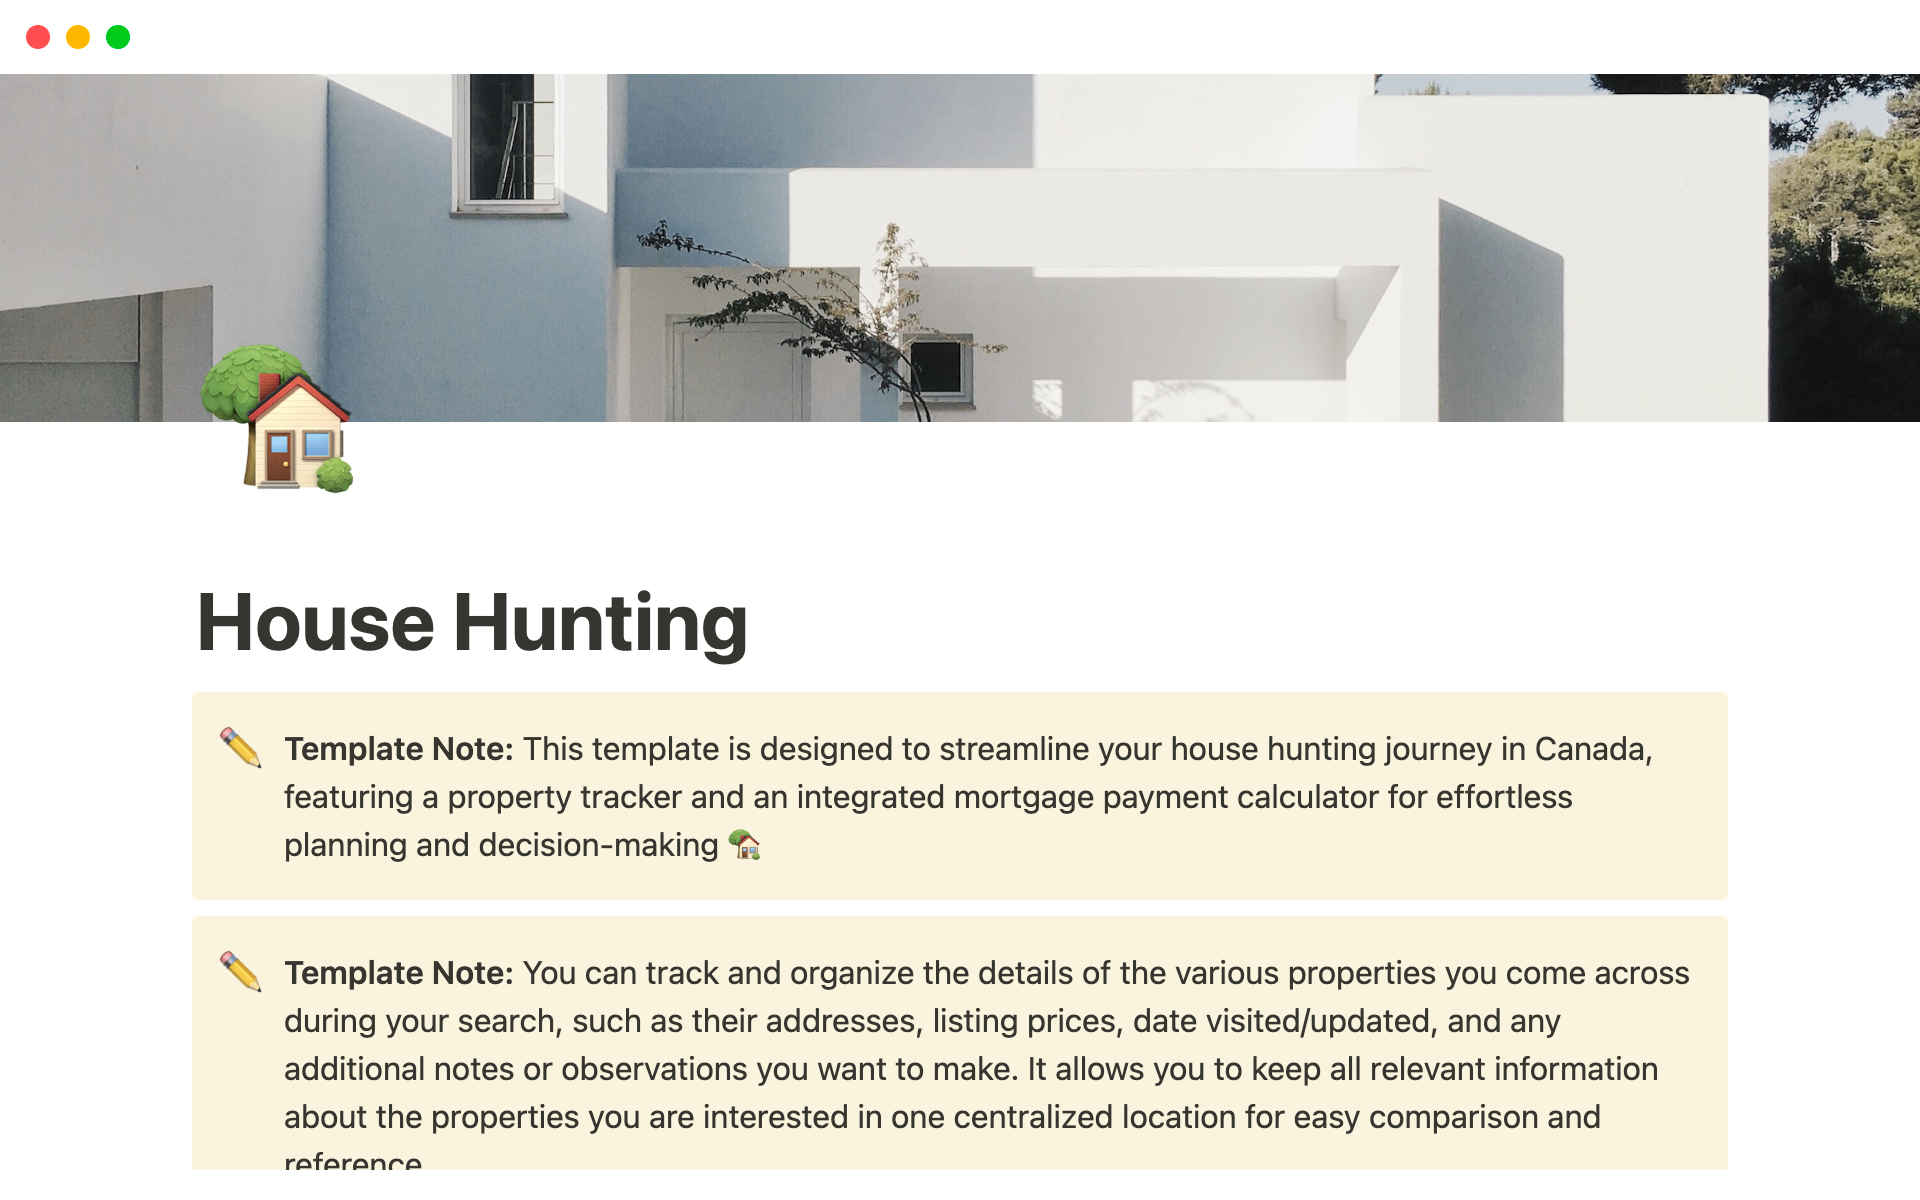 This template is designed to streamline your house hunting journey in Canada, featuring a property tracker and an integrated mortgage payment calculator for effortless planning and decision-making.